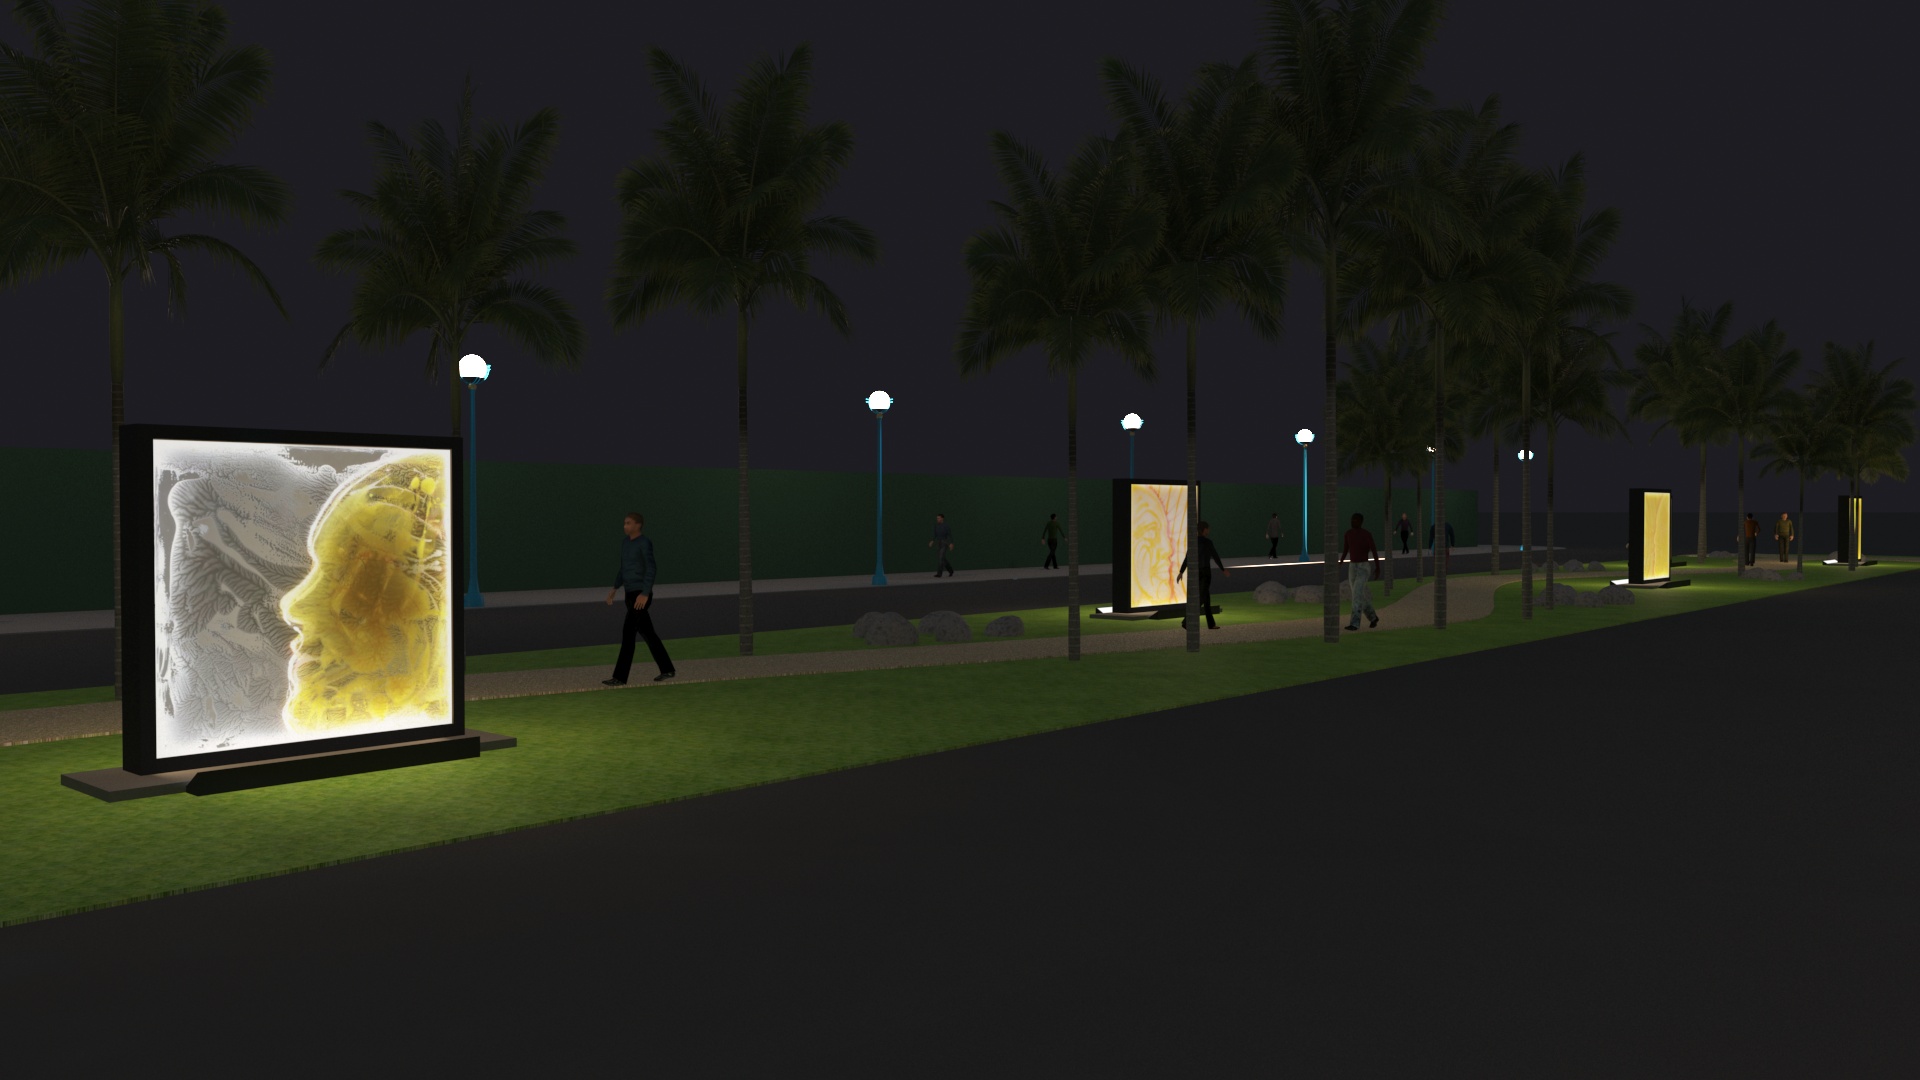 Proposed West Hollywood Luminous Public Art Exhibition Project